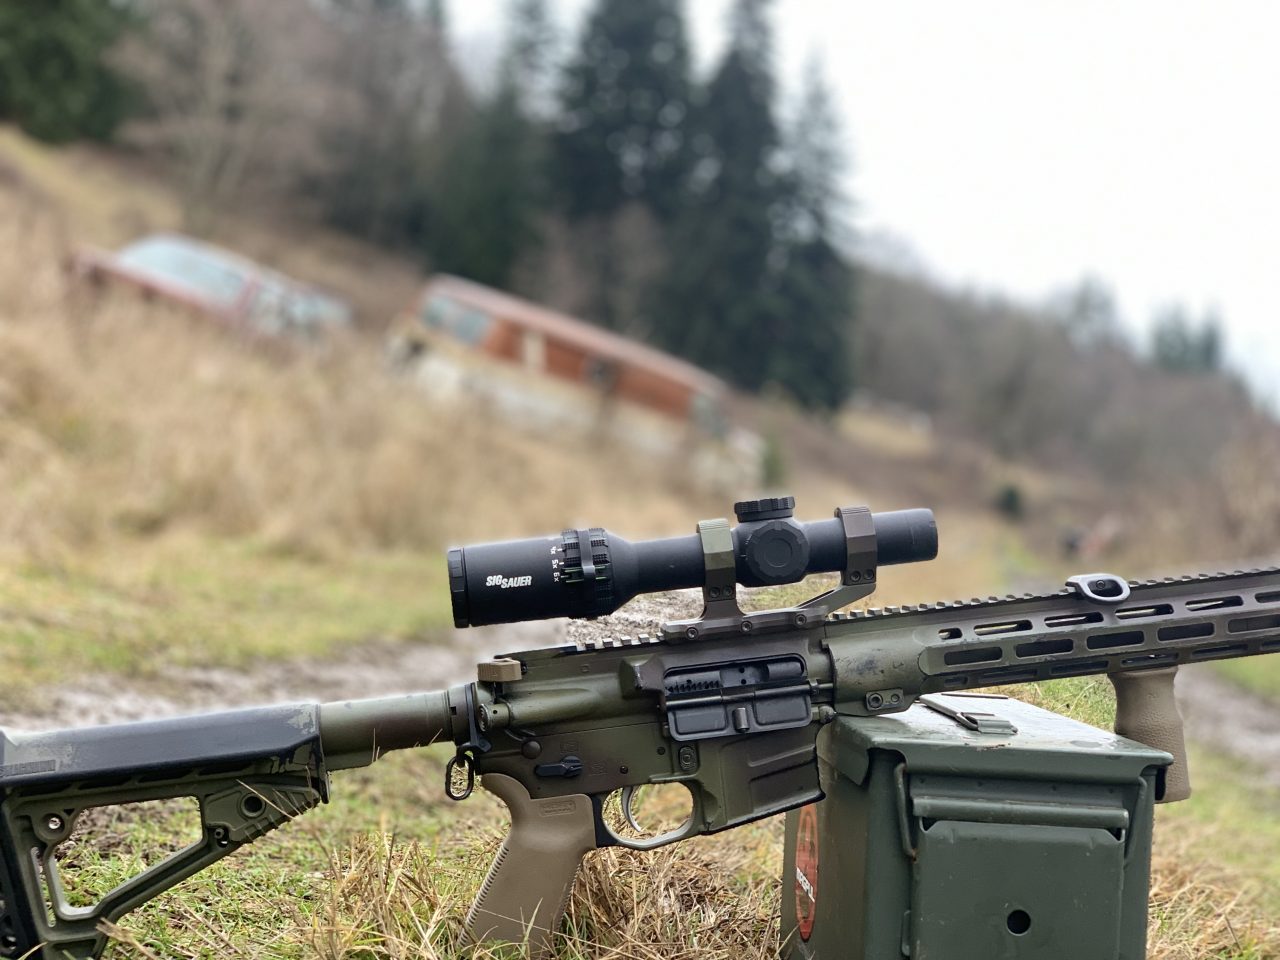 The Tango 6 works great as a DMR optic. And the low profile turrets don’t snag on anything!